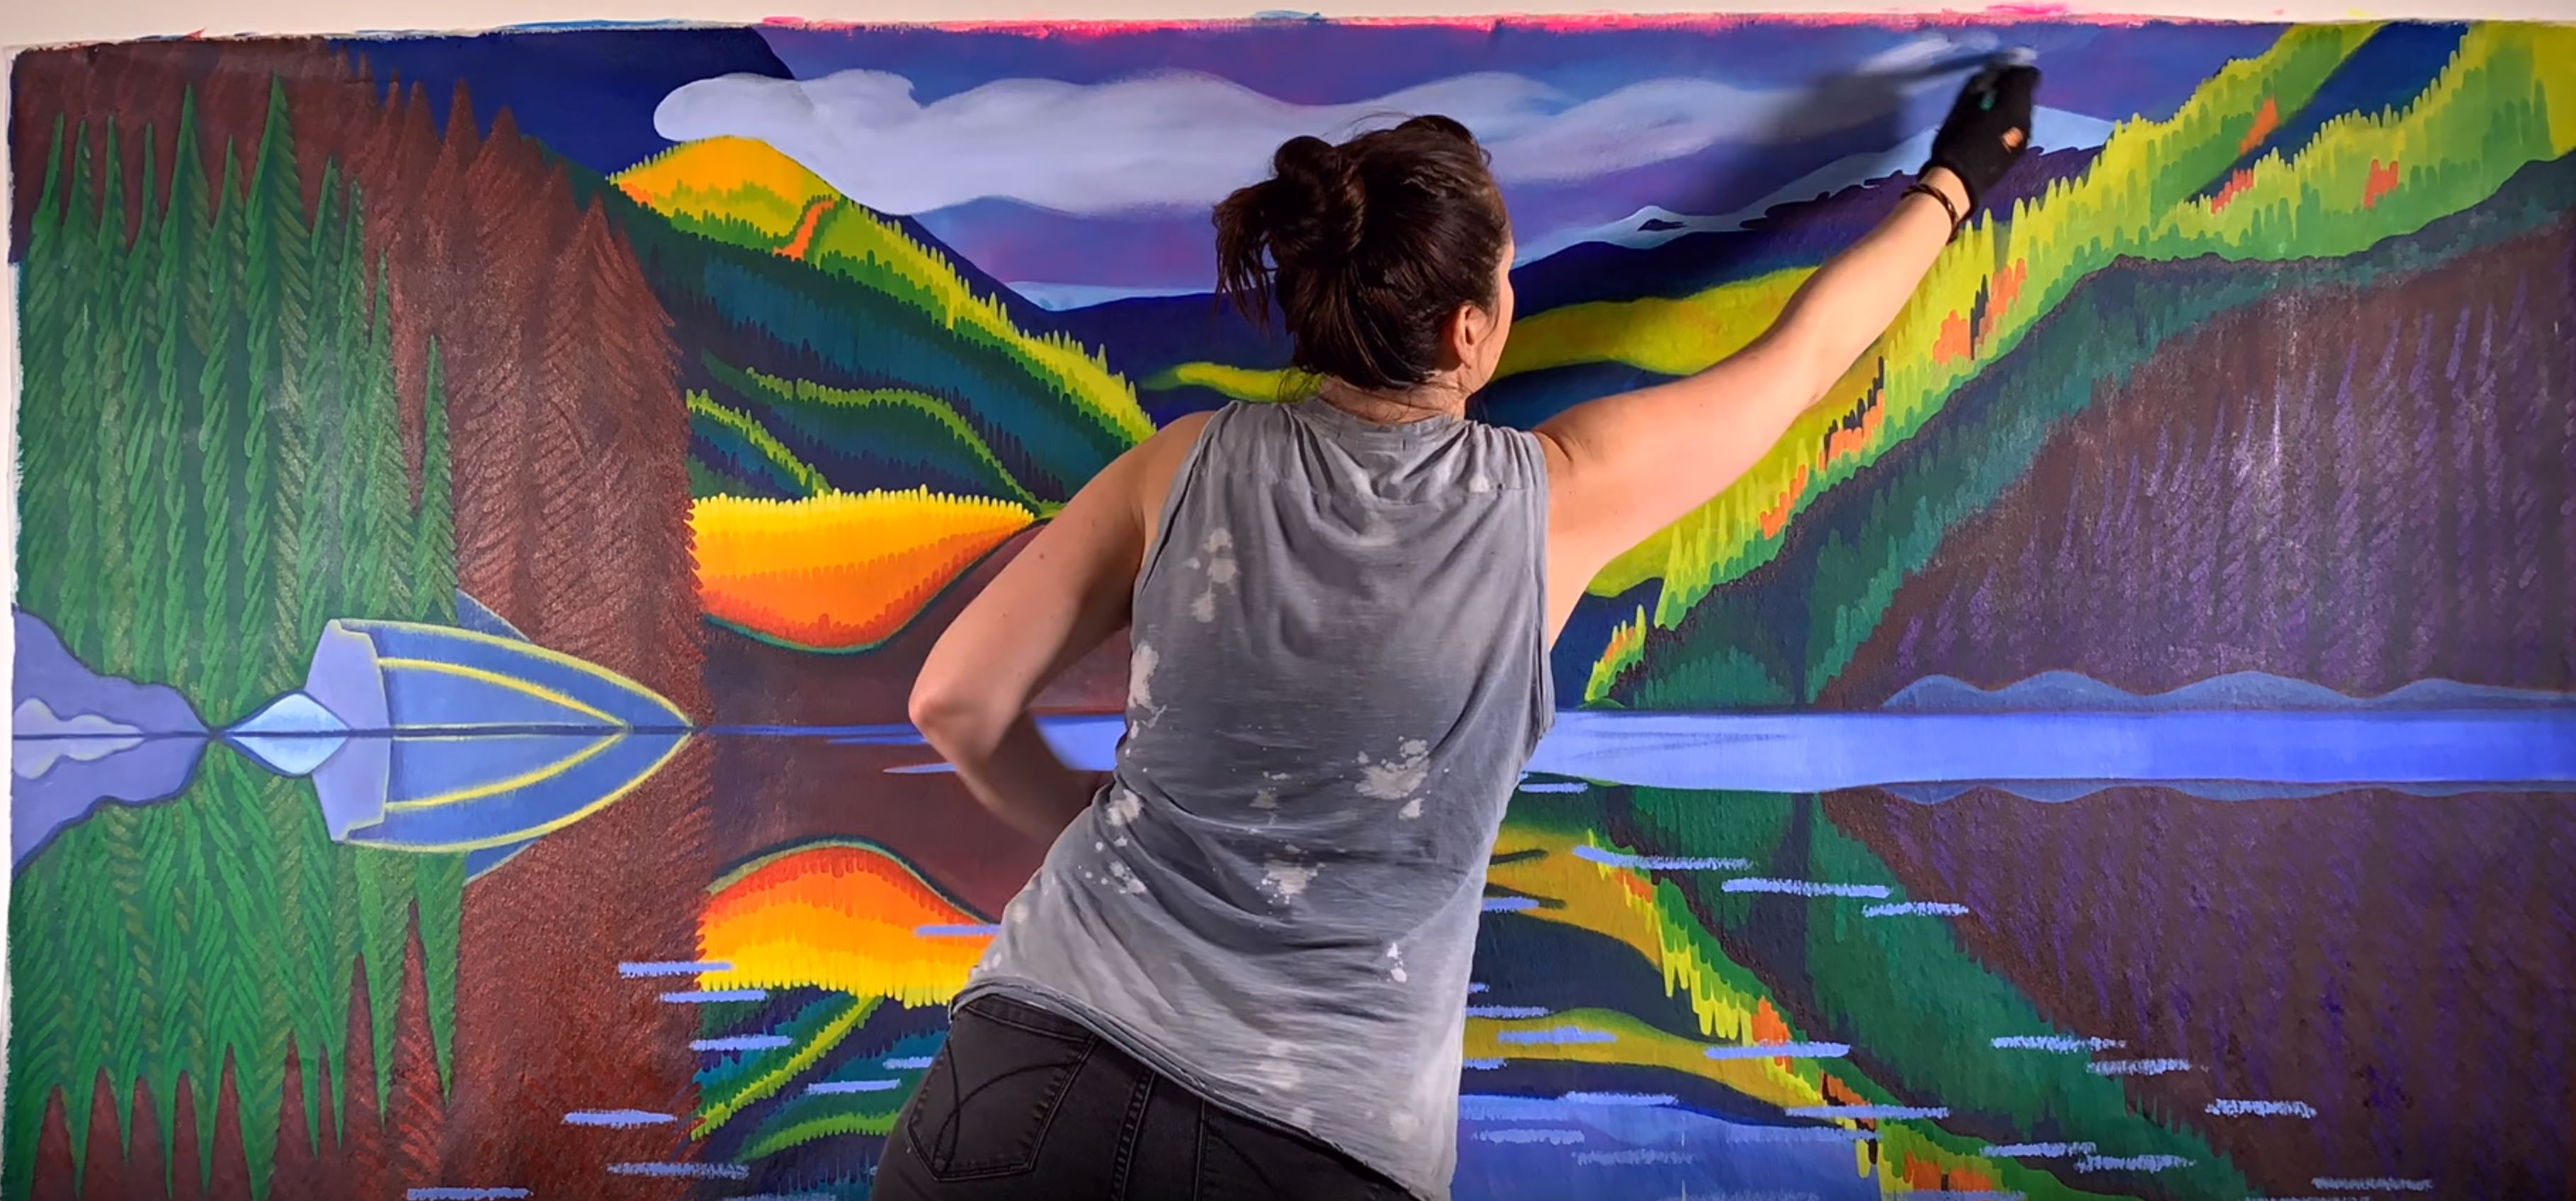 canadian artist brandy saturley makes a large landscape painting